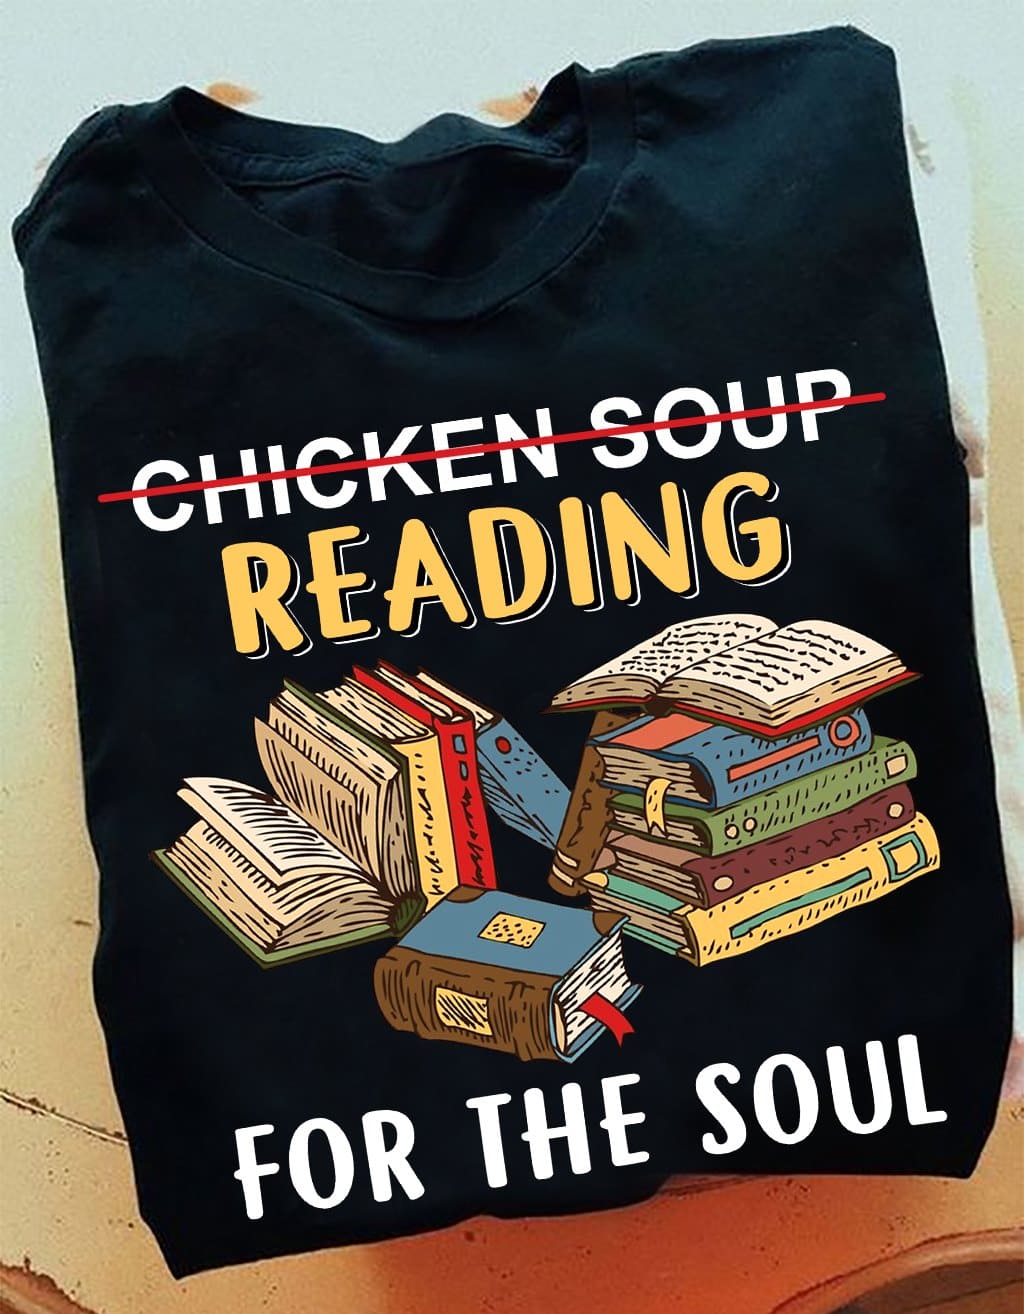 Books Graphic T-shirt - Chicken soup reading for the soul